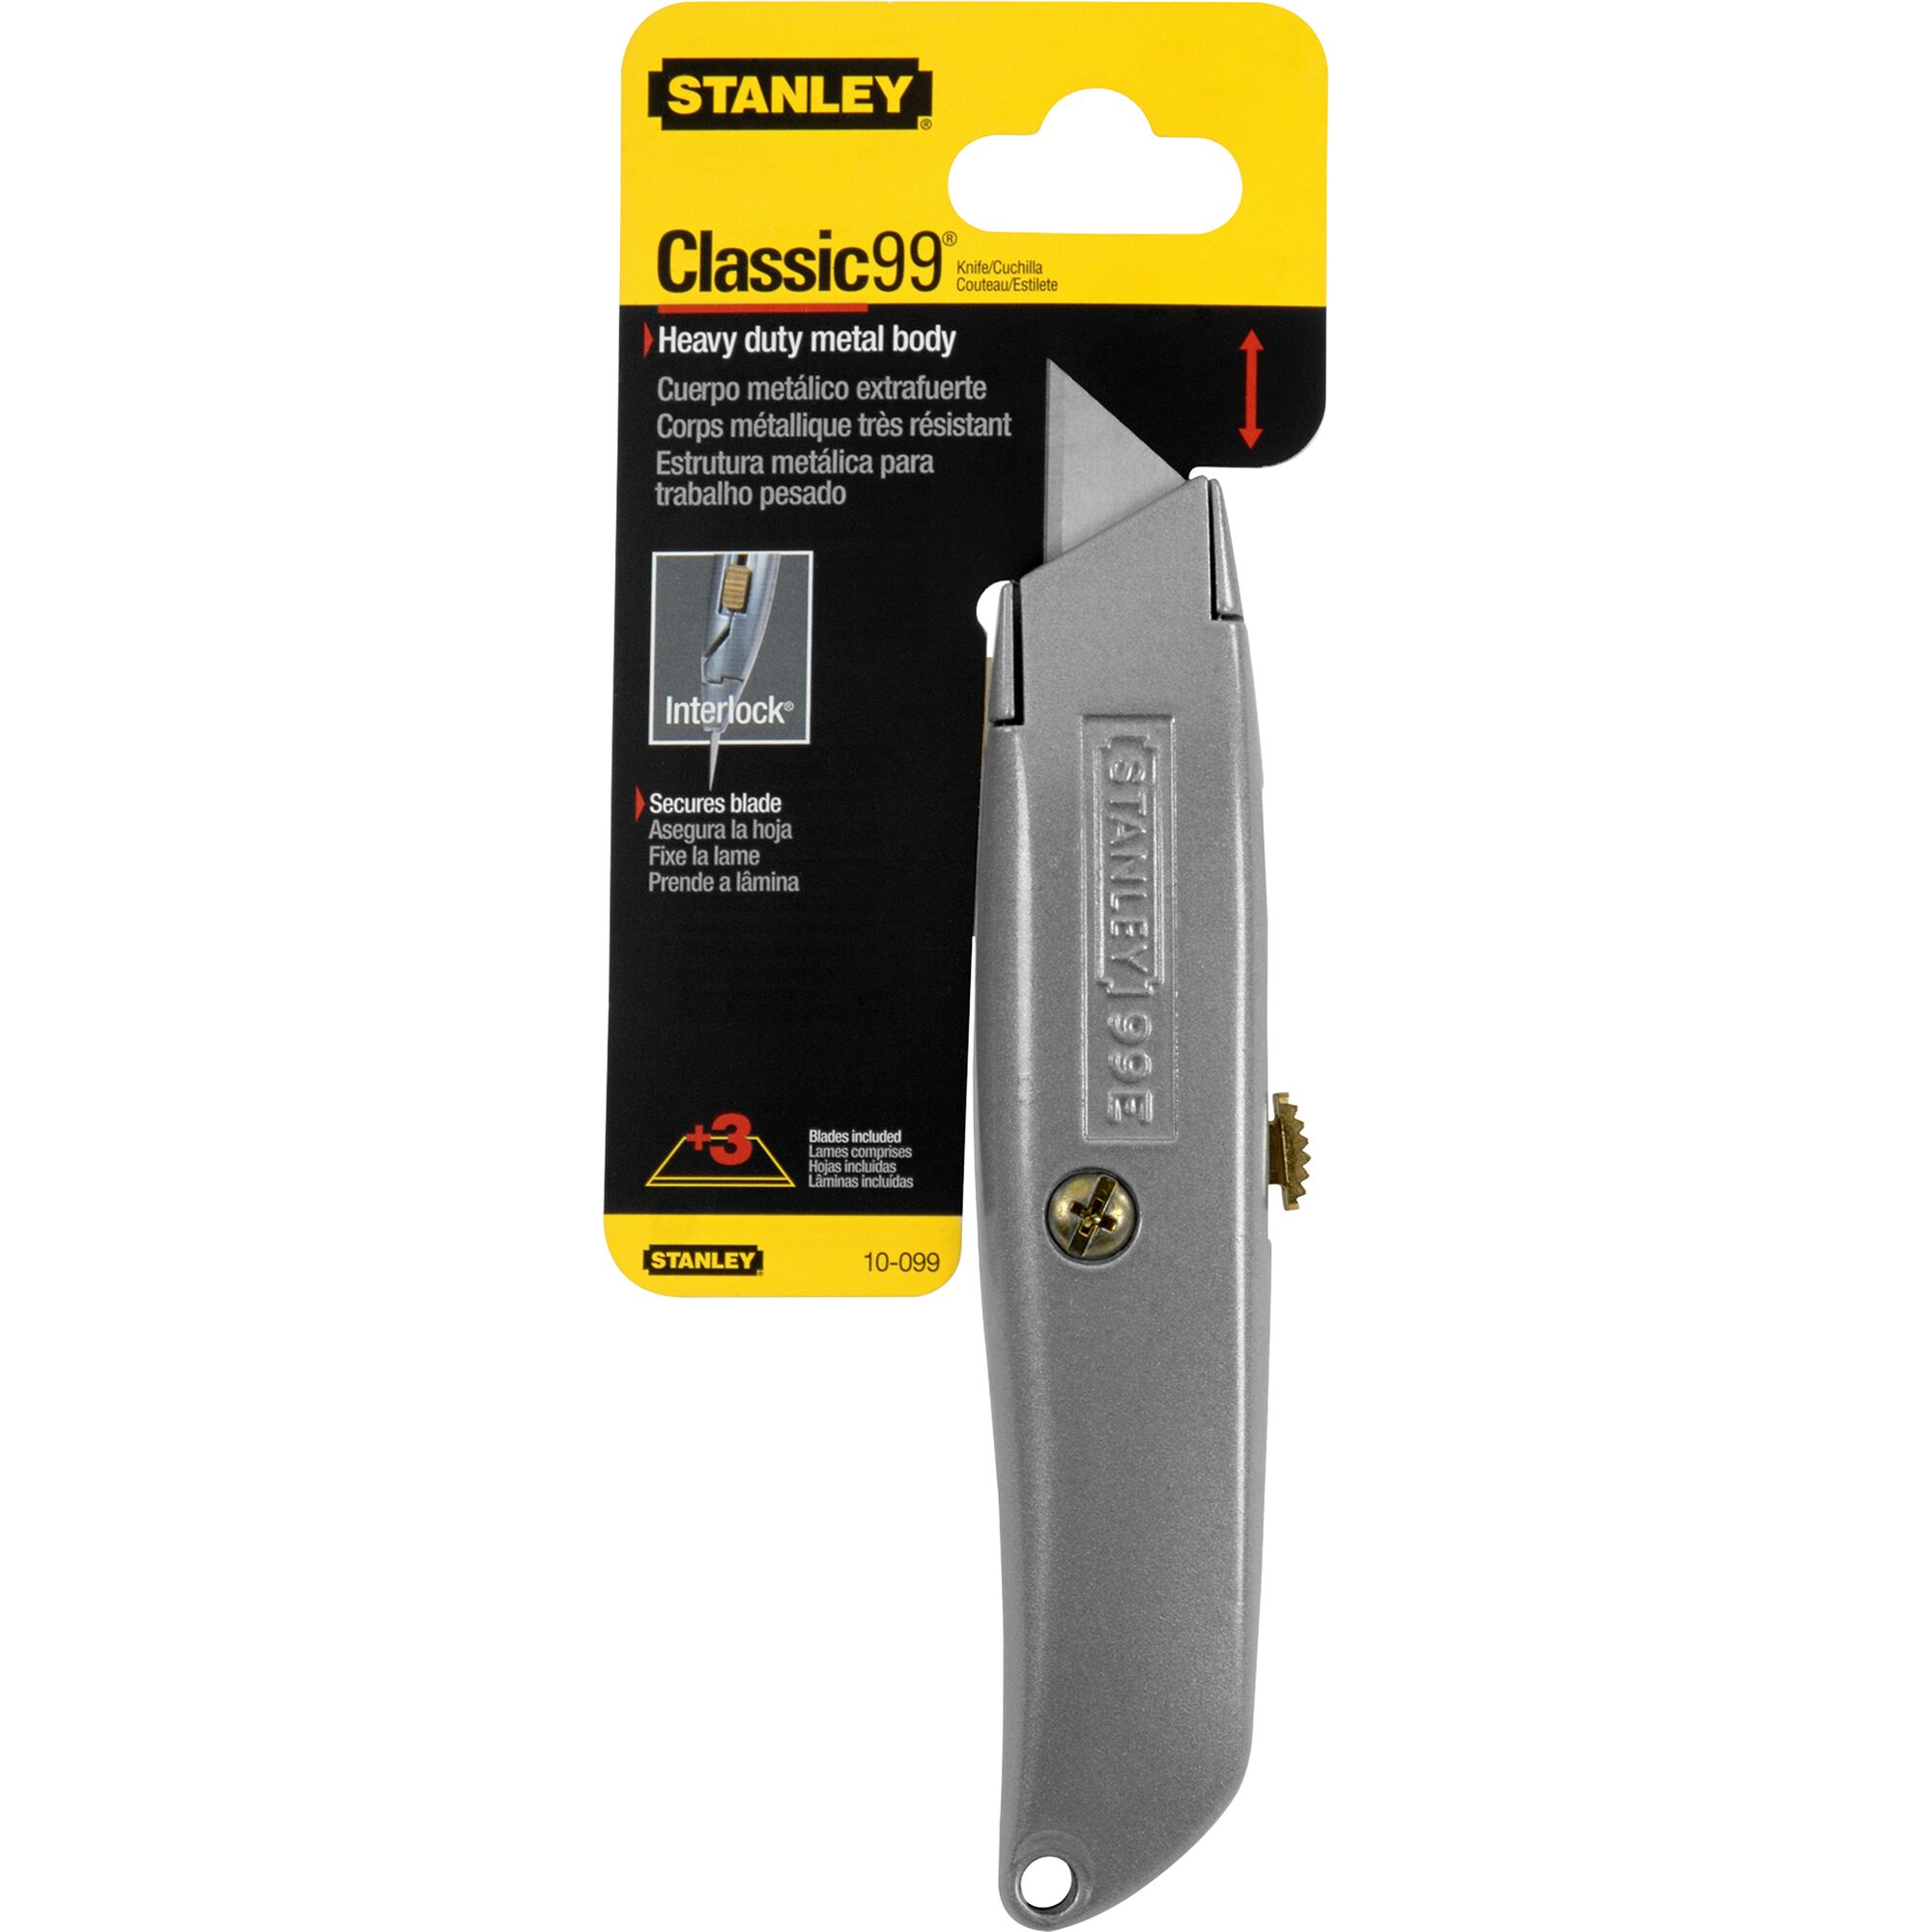 STHT10273 NEW STANLEY Class 99 Retractable Utility Knifes 2 Pack 